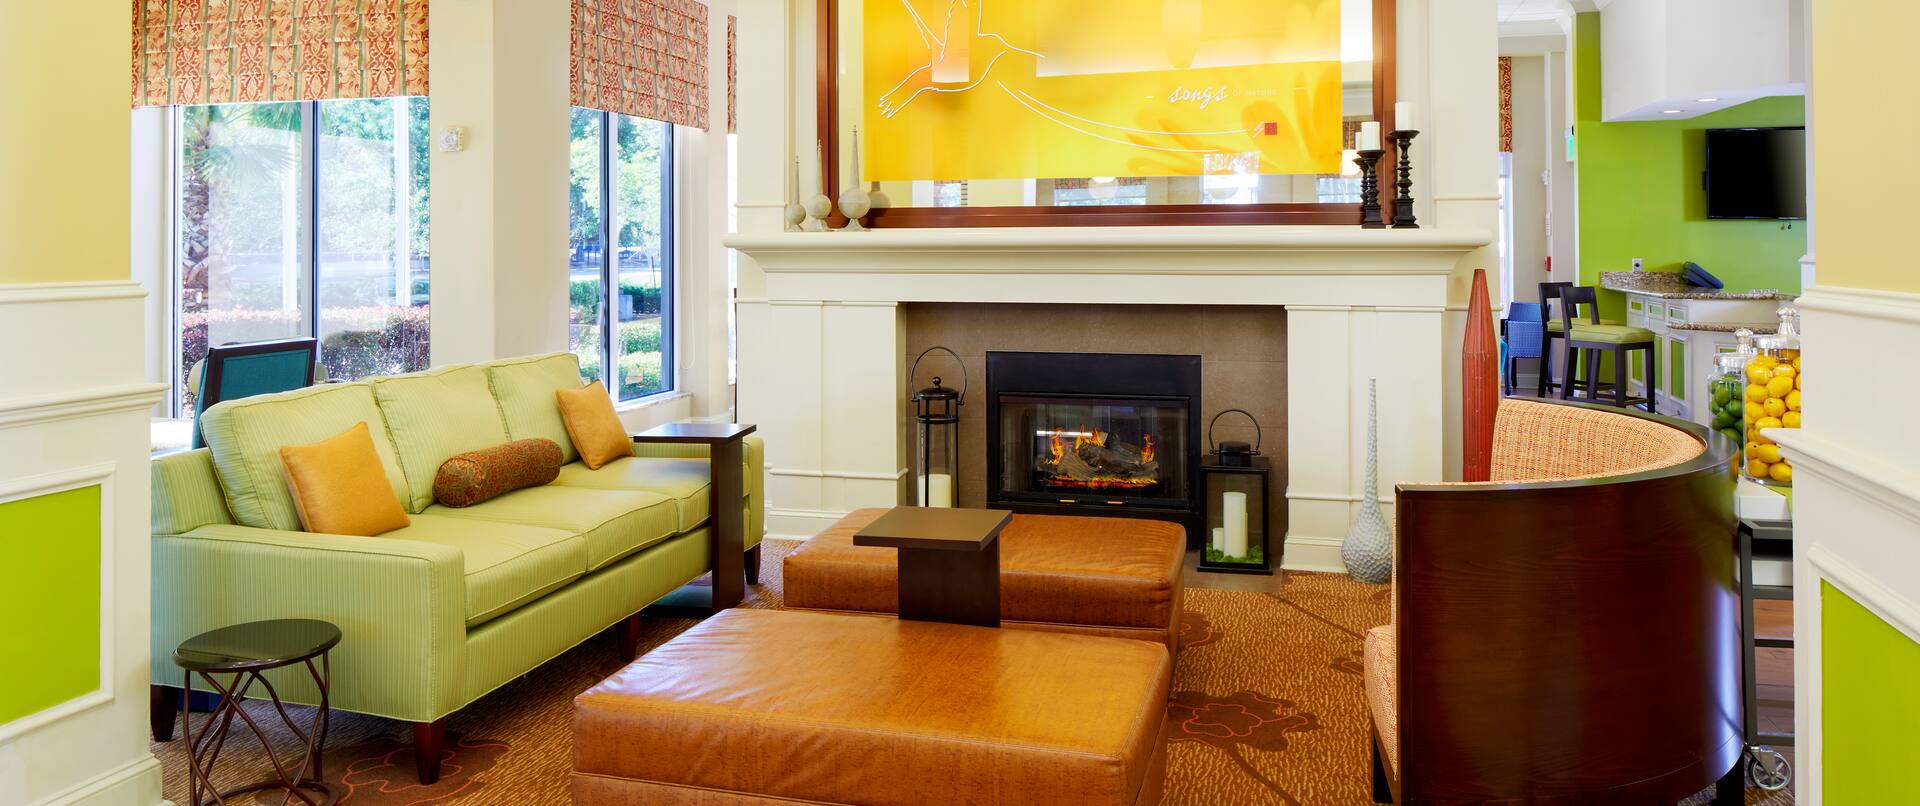 Wall Art and Soft Seating Around Fireplace in Lobby With Large Windows